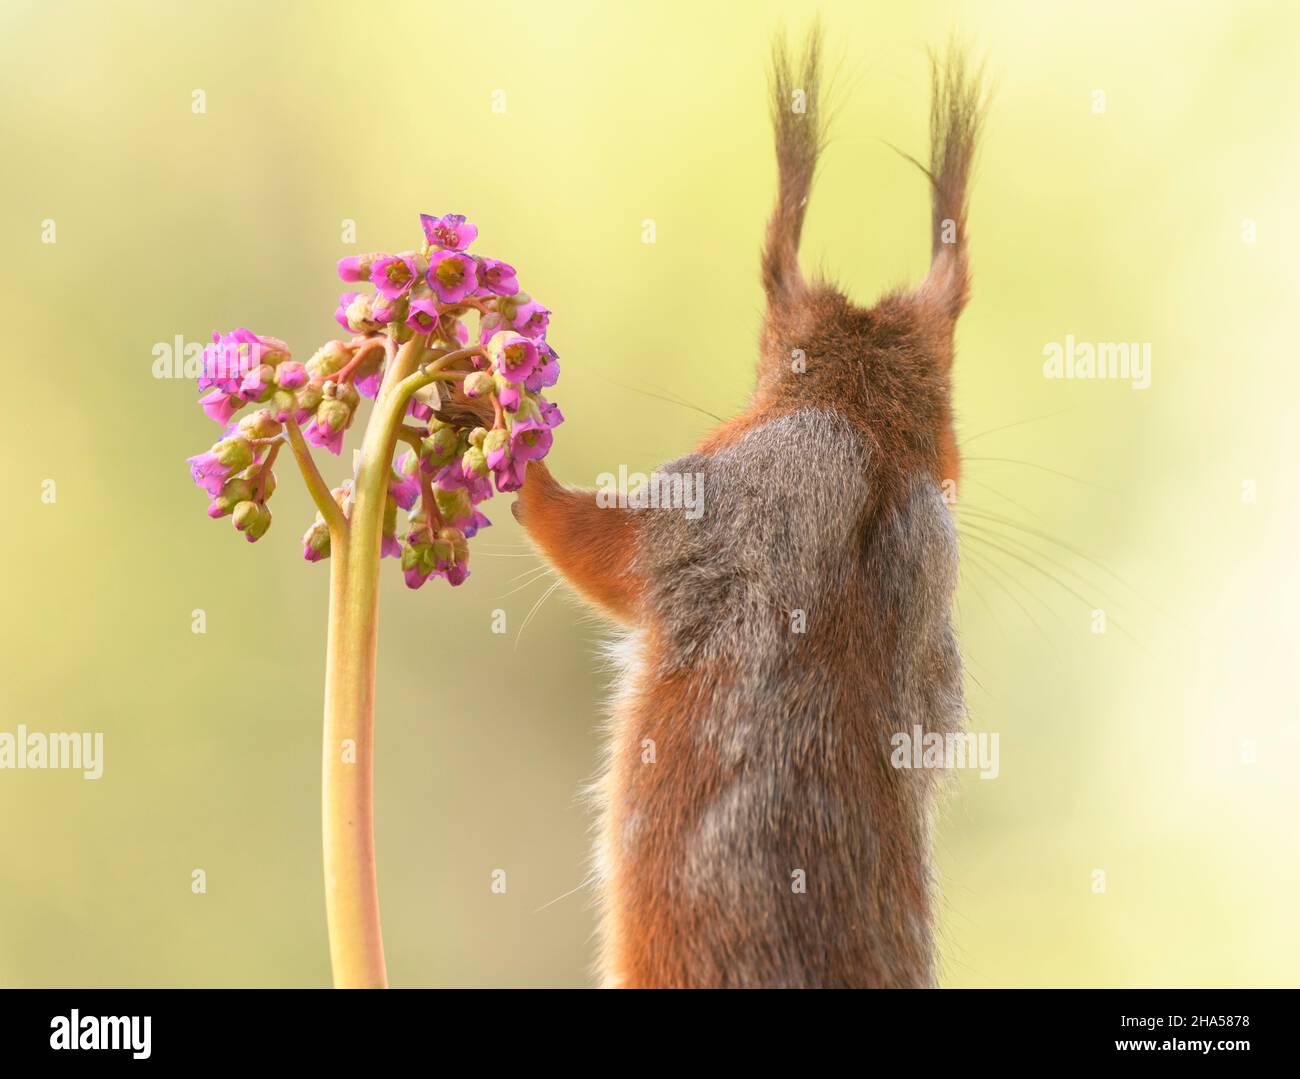 red squirrel is holding a bergenia flower Stock Photo